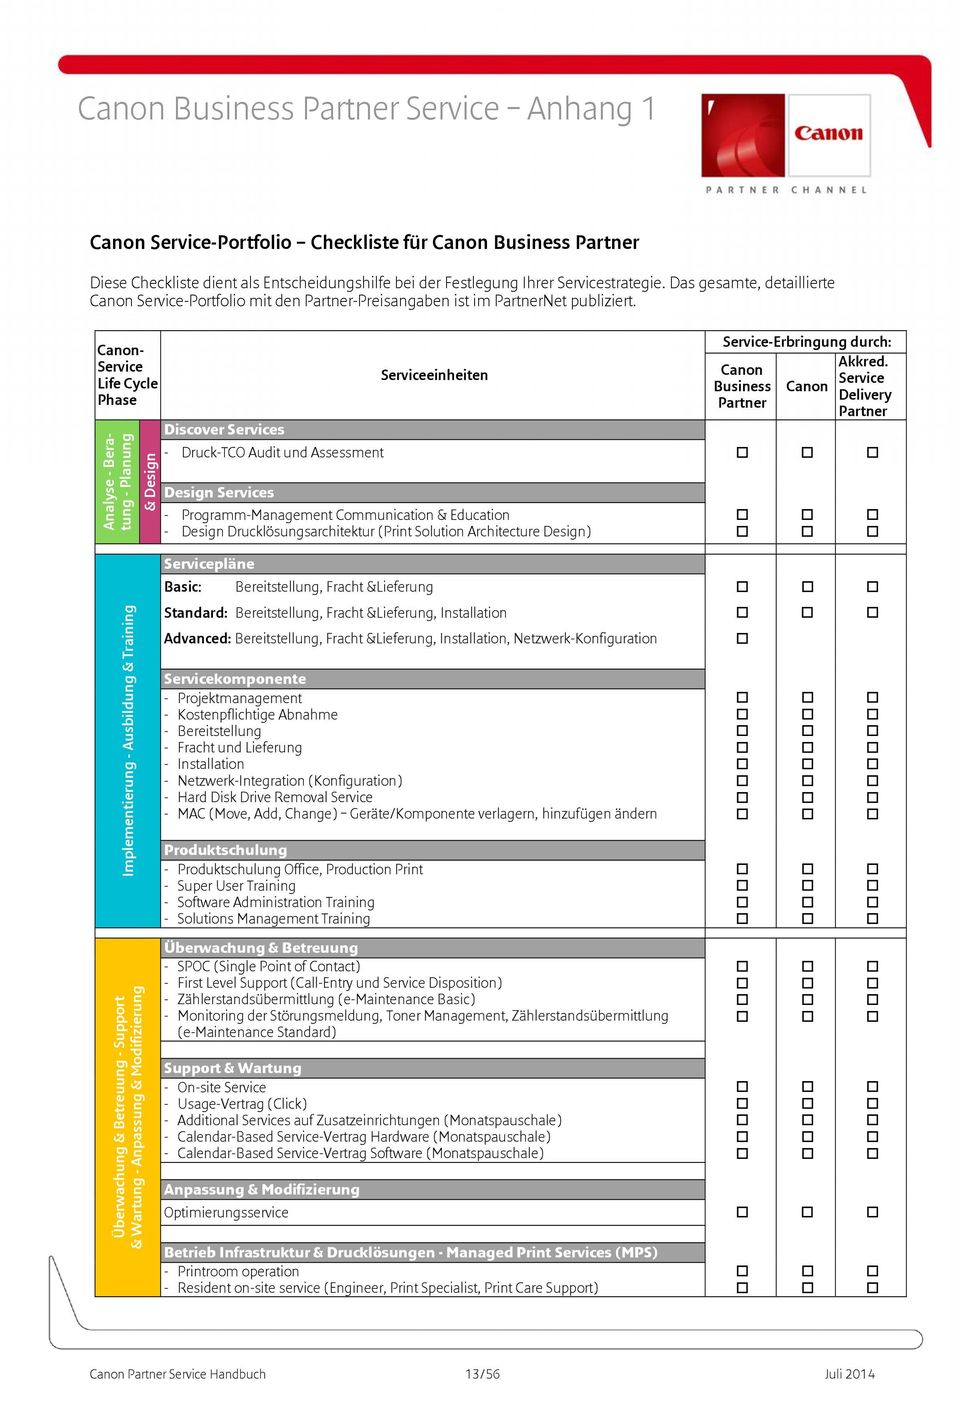 Canon- Service Life Cycle Phase Analyse - Beratung - Planung & Design Serviceeinheiten Service-Erbringung durch: Akkred.